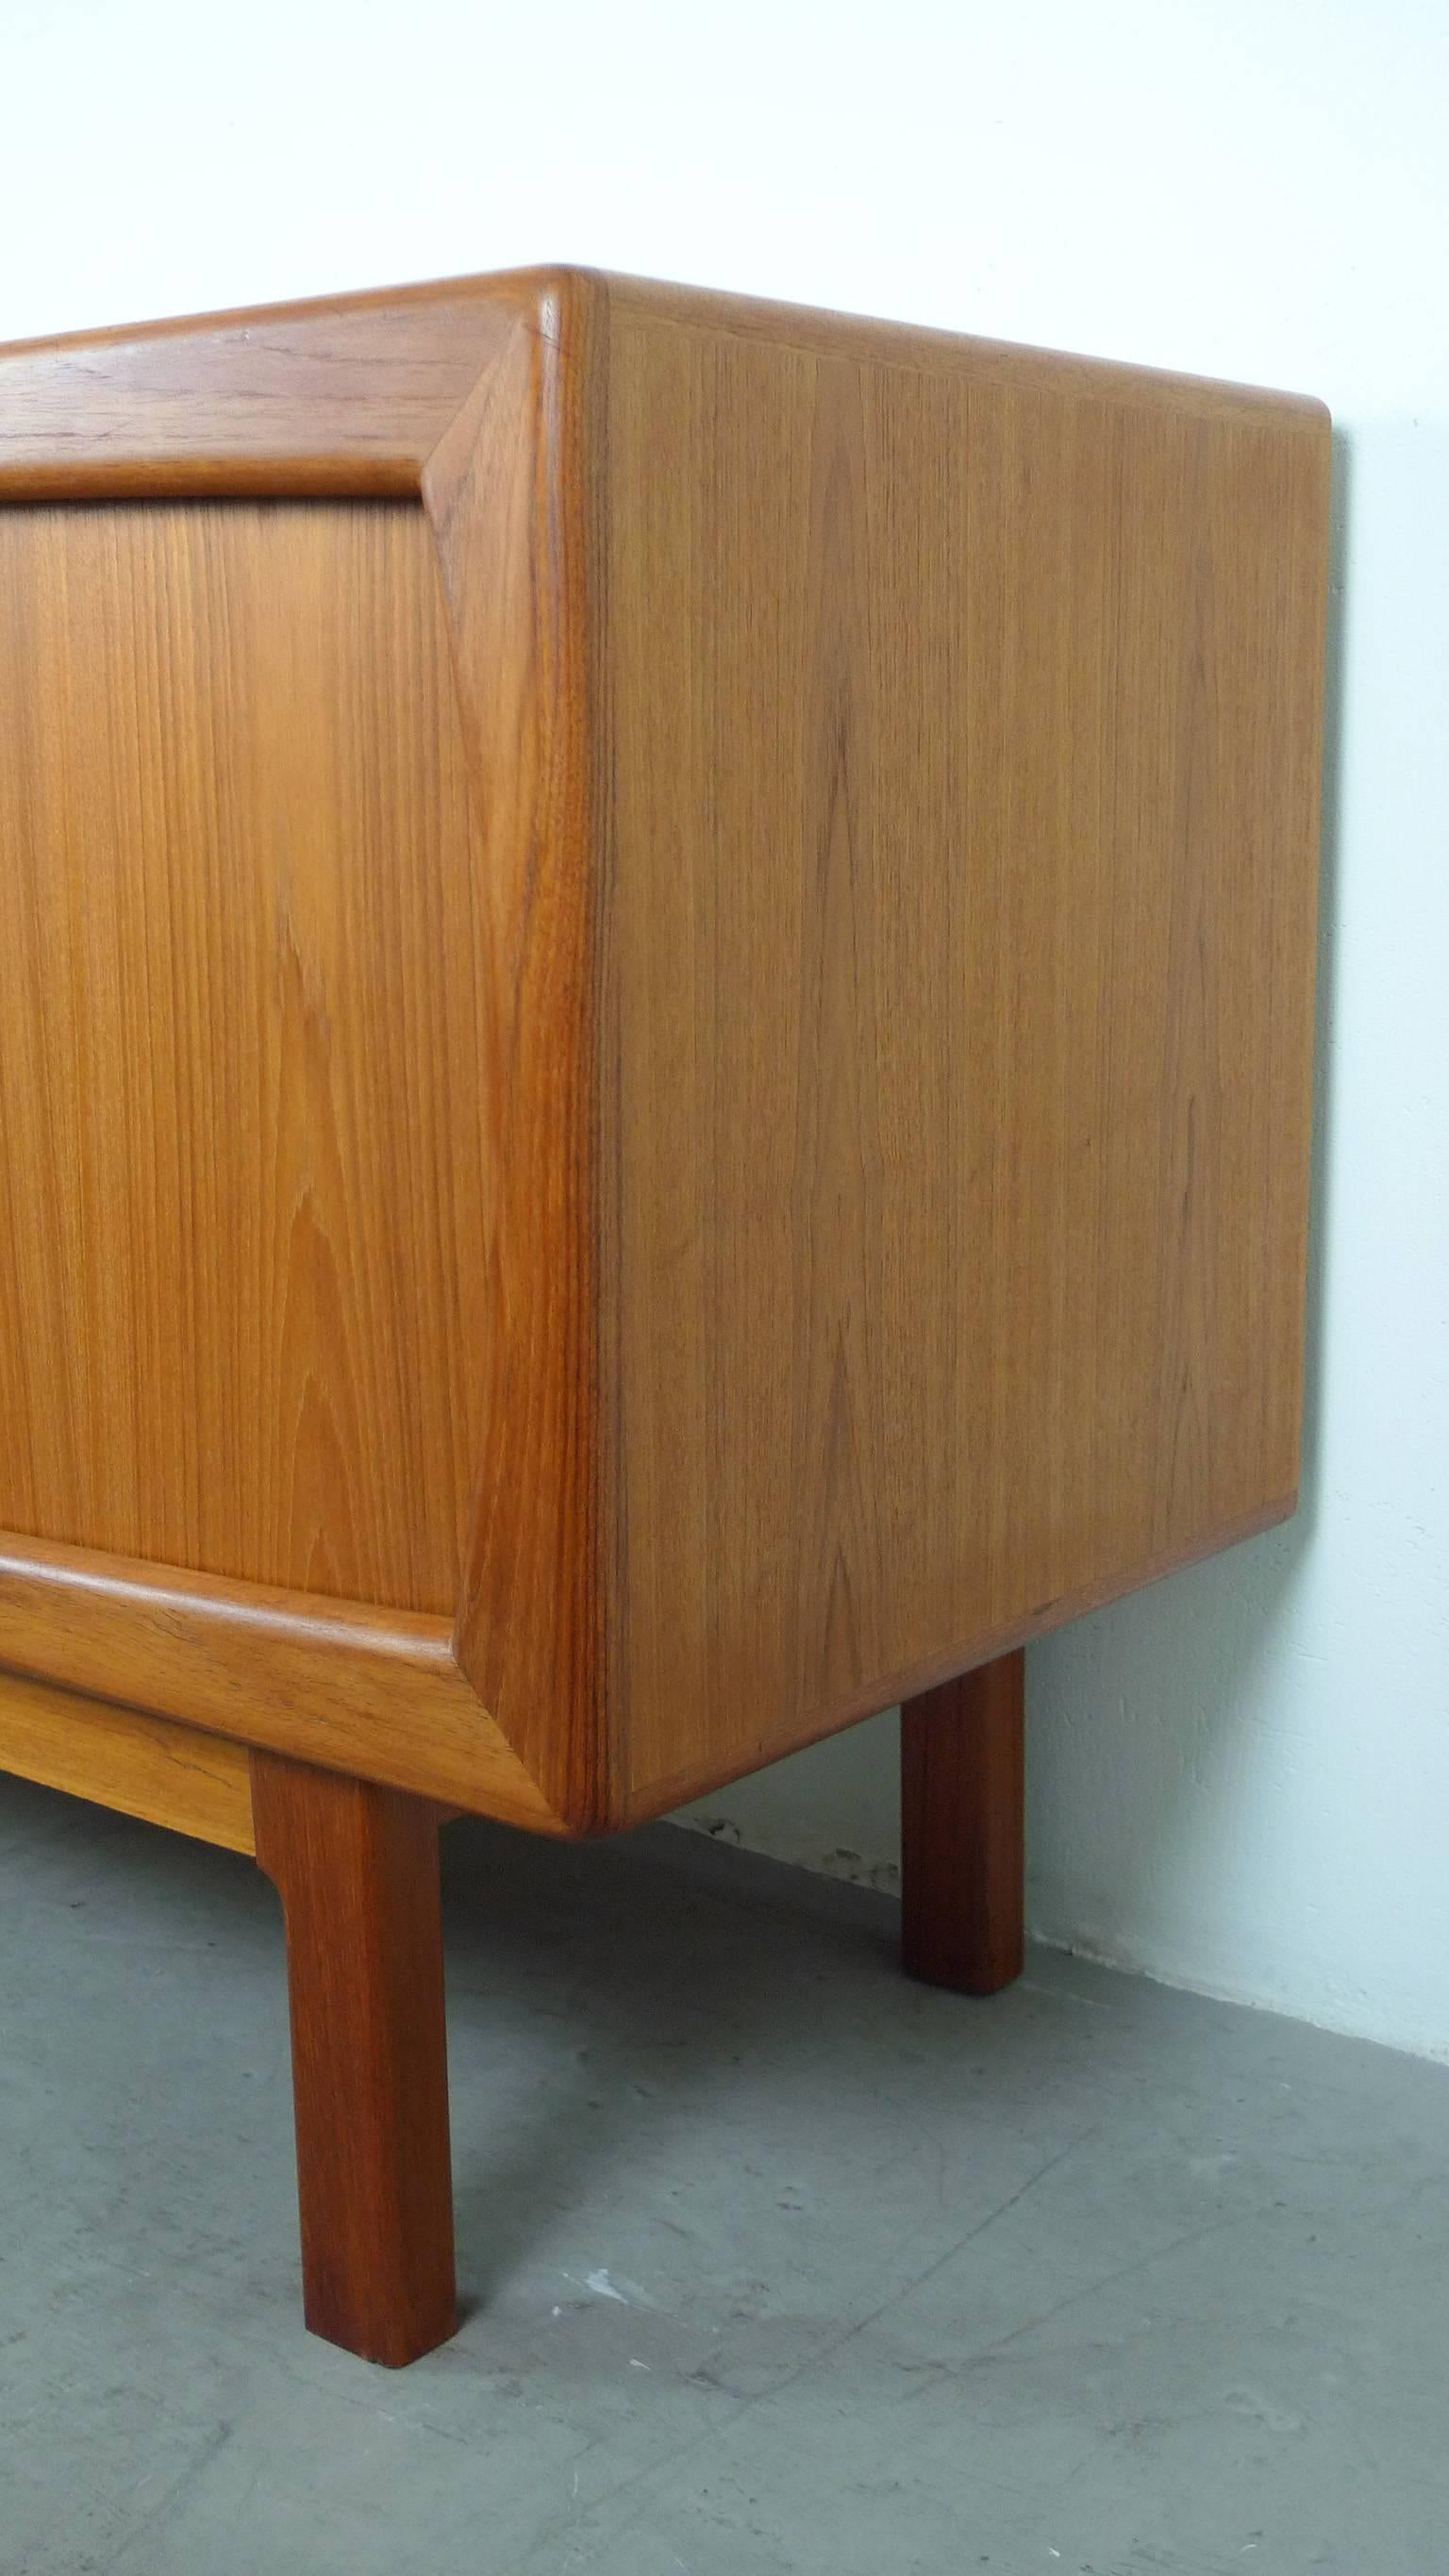 20th Century Teak Sideboard with Sliding Doors and Drawers from Dyrlund, Denmark, 1960s